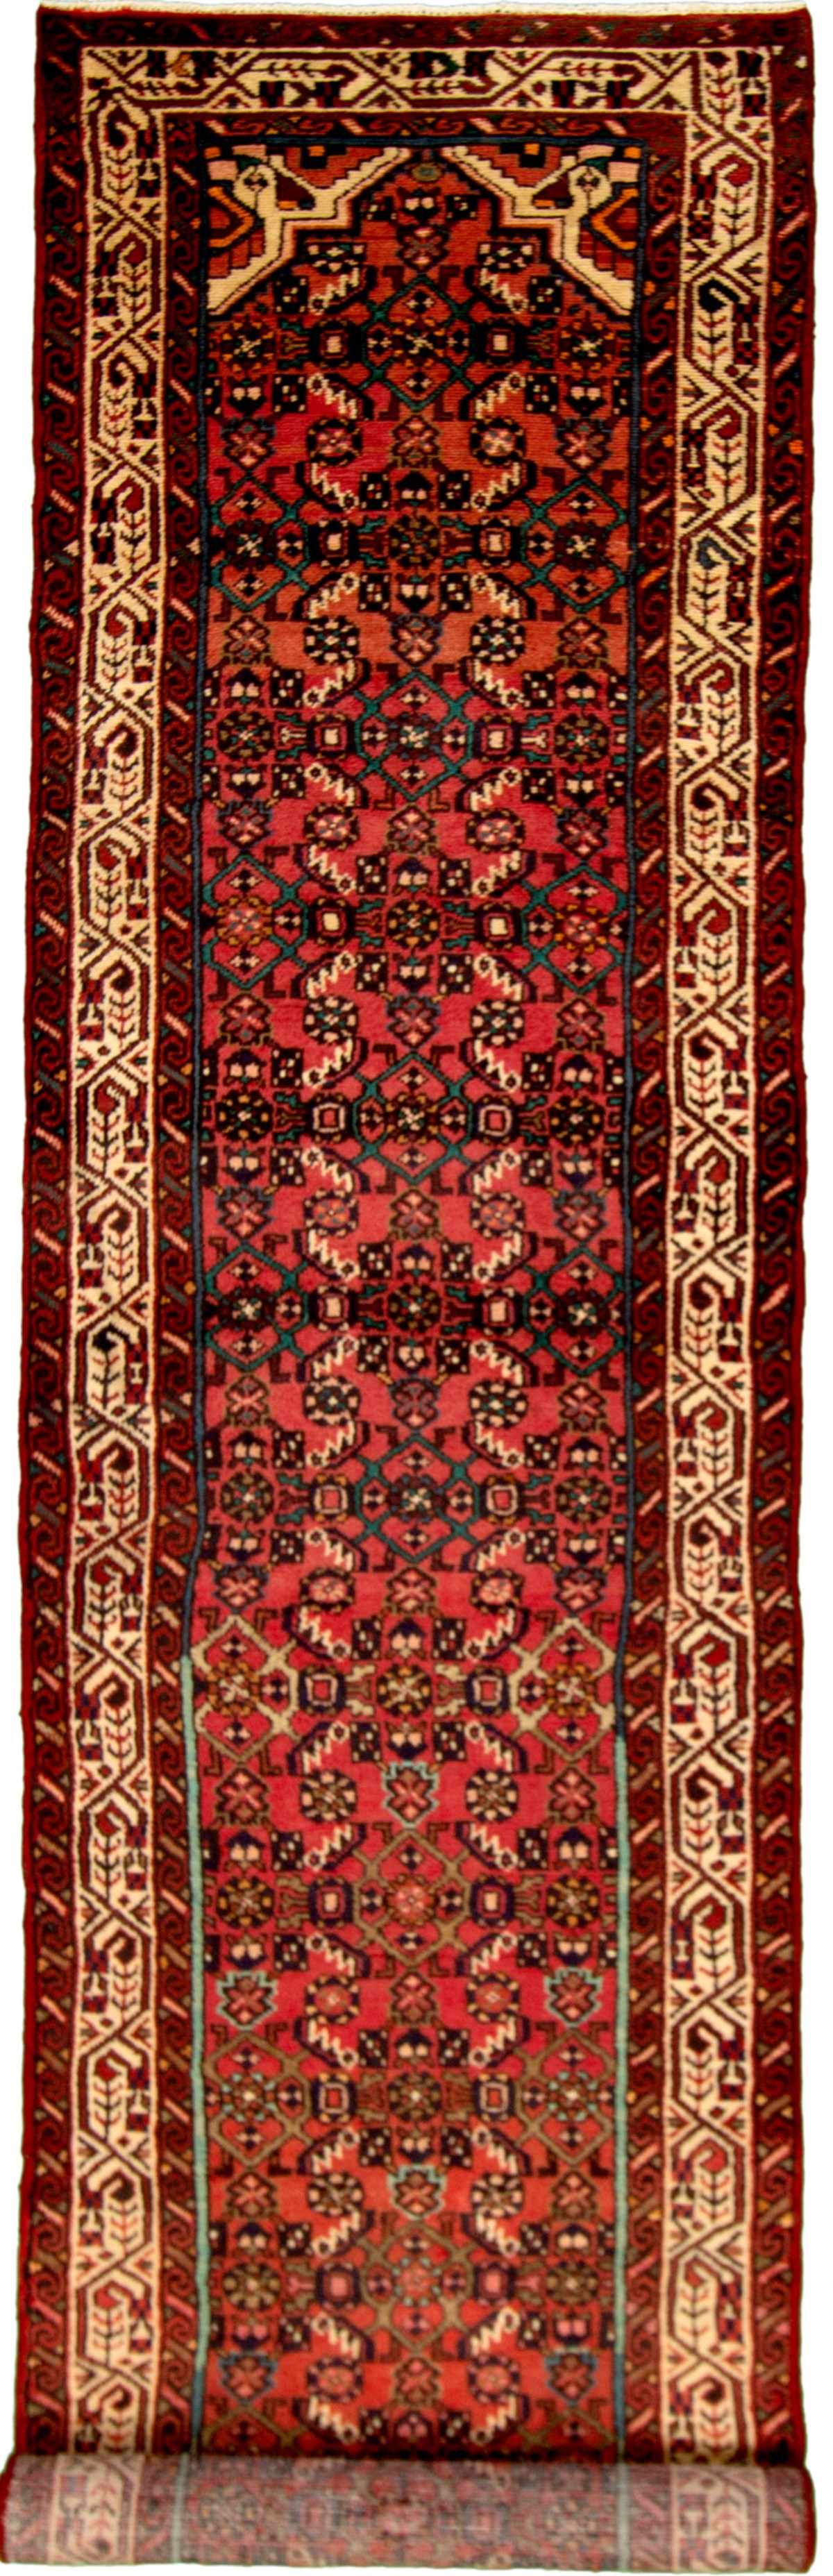 Hand-knotted Hosseinabad Dark Copper Wool Rug 2'9" x 9'6" Size: 2'9" x 9'6"  